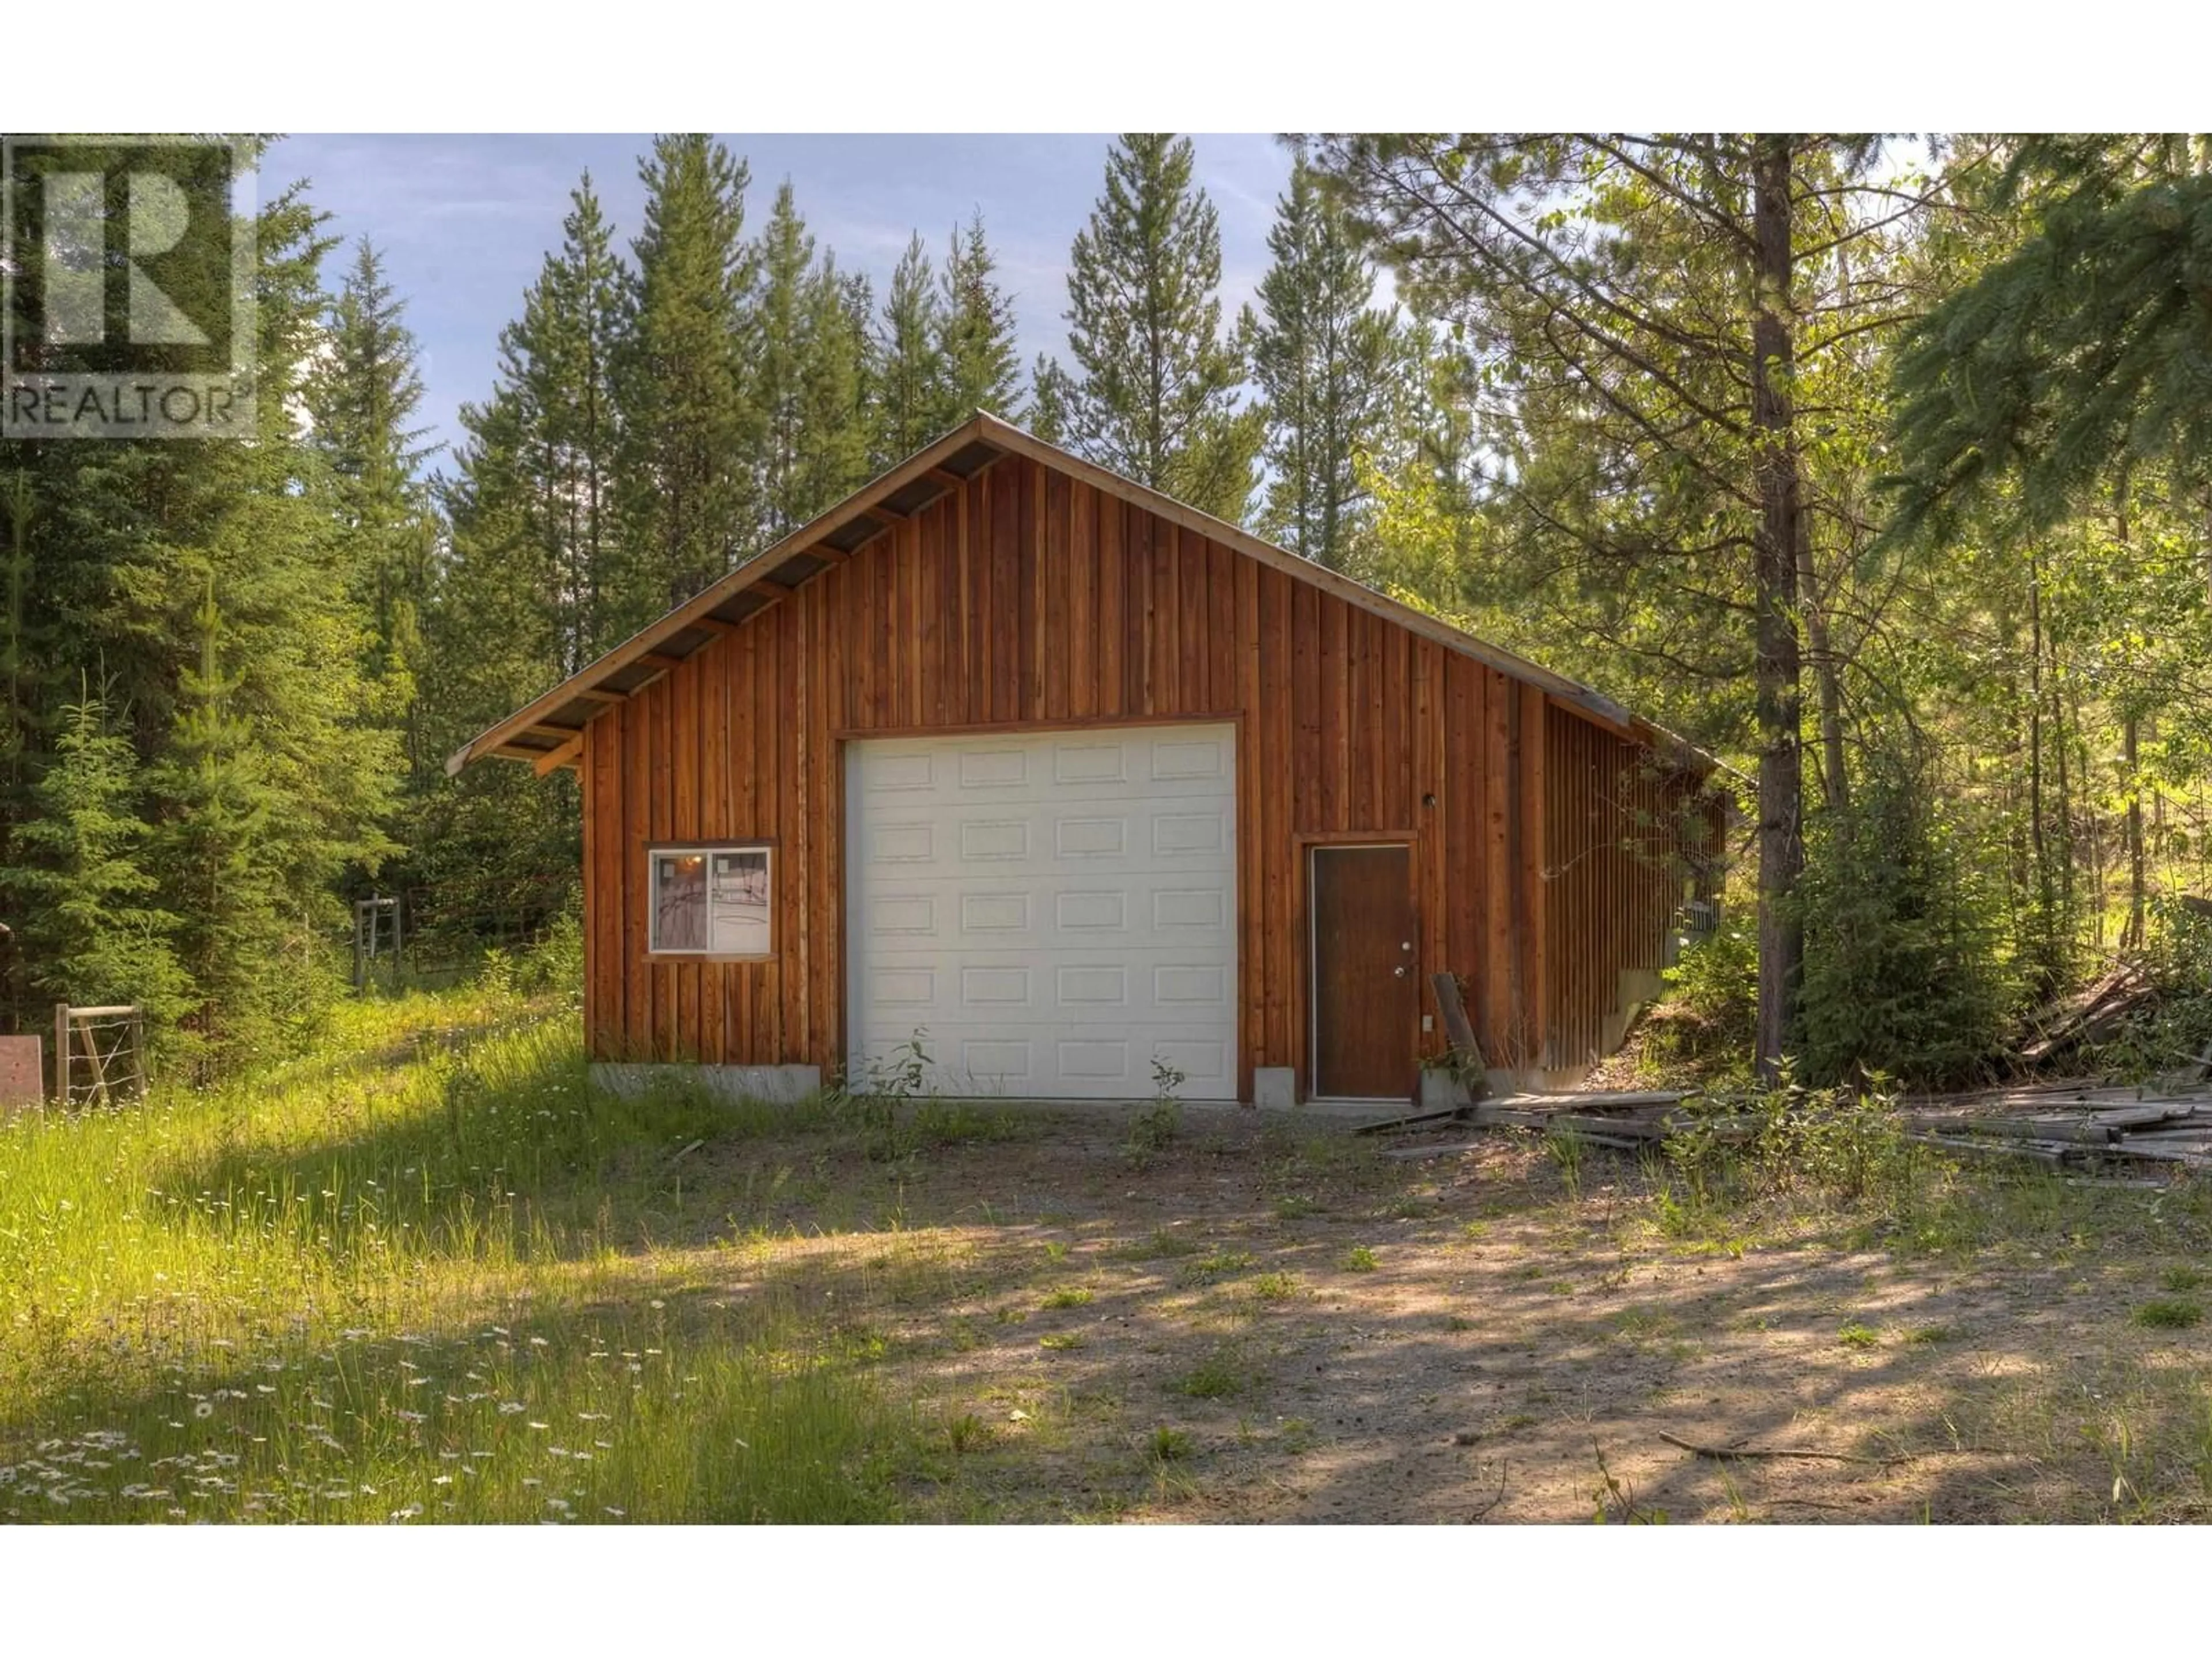 Shed for 2330 MILE 108 HORSEFLY ROAD, Horsefly British Columbia V0L1L0